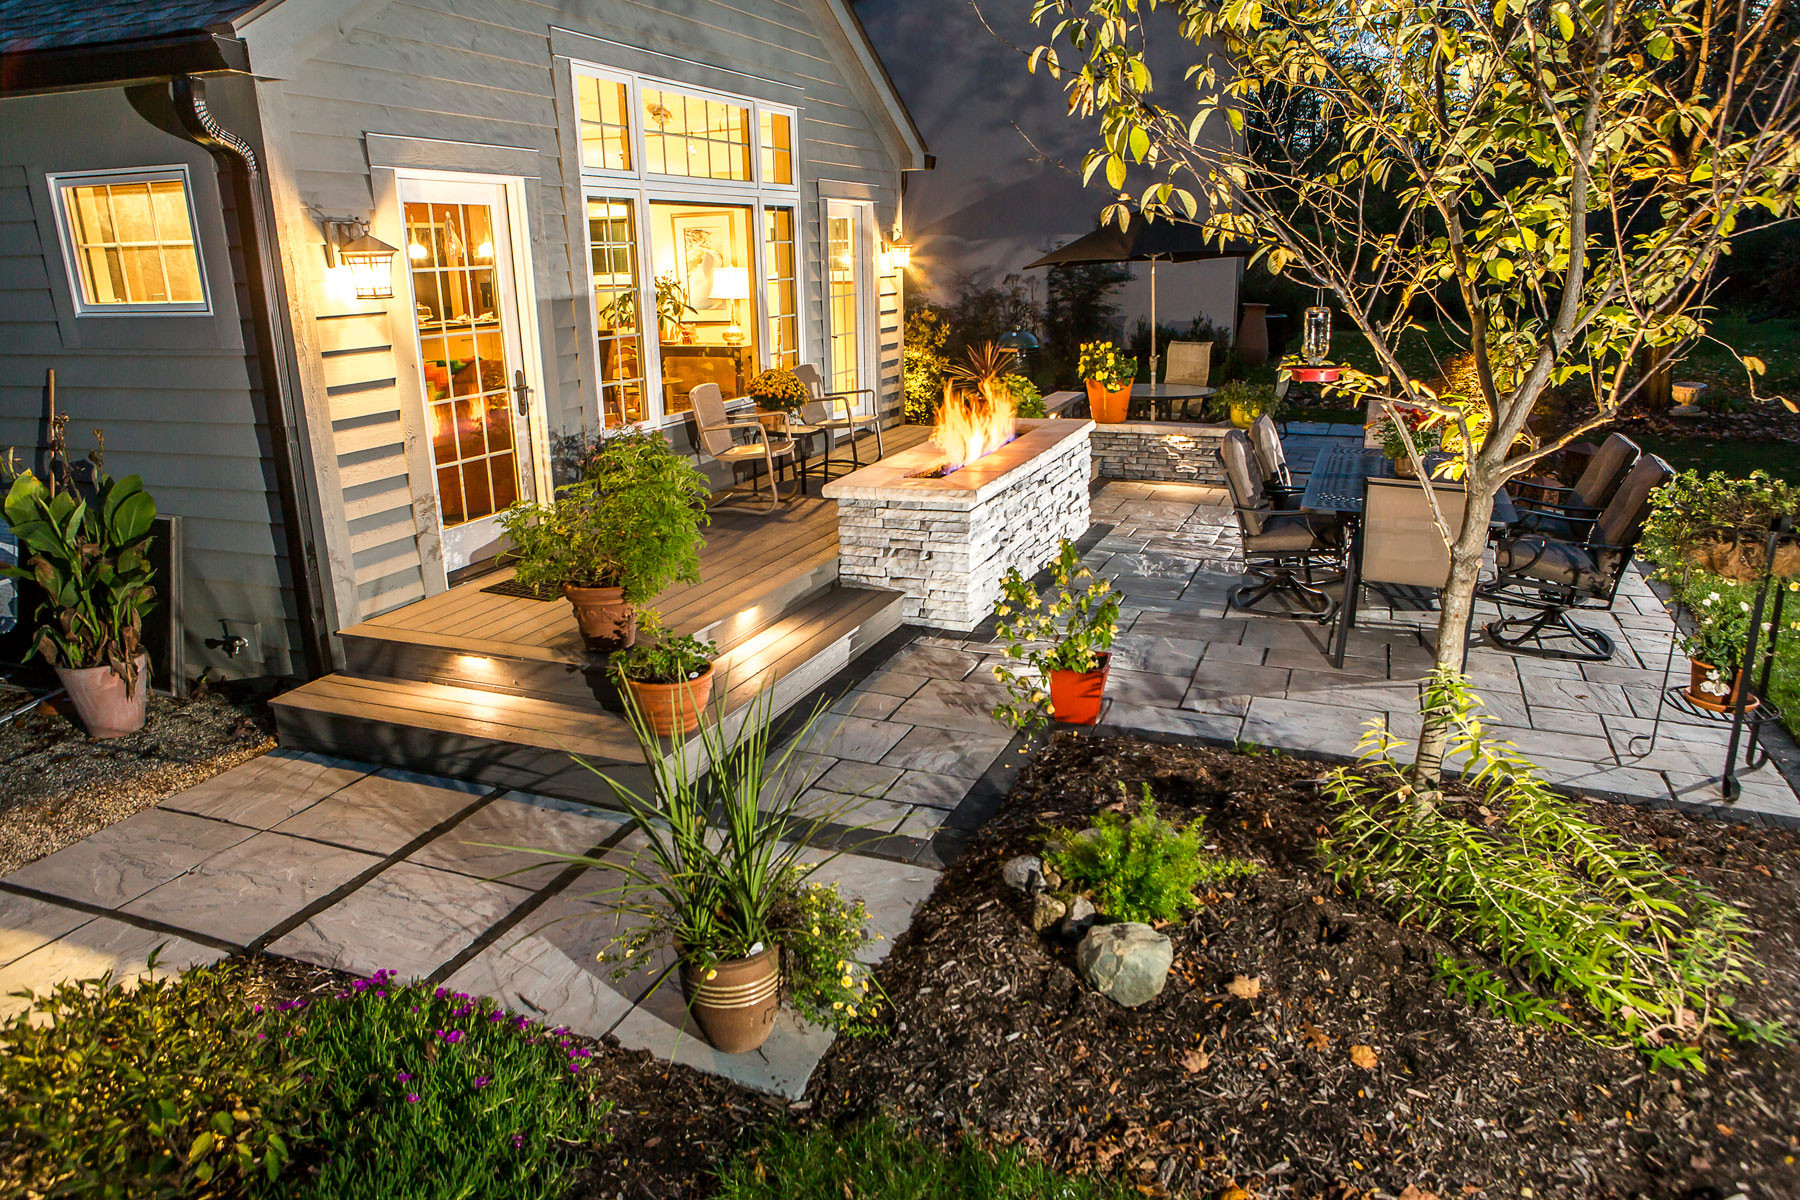 Patio Landscape Lighting
 Outdoor Landscape Lighting for Patios Walkways and